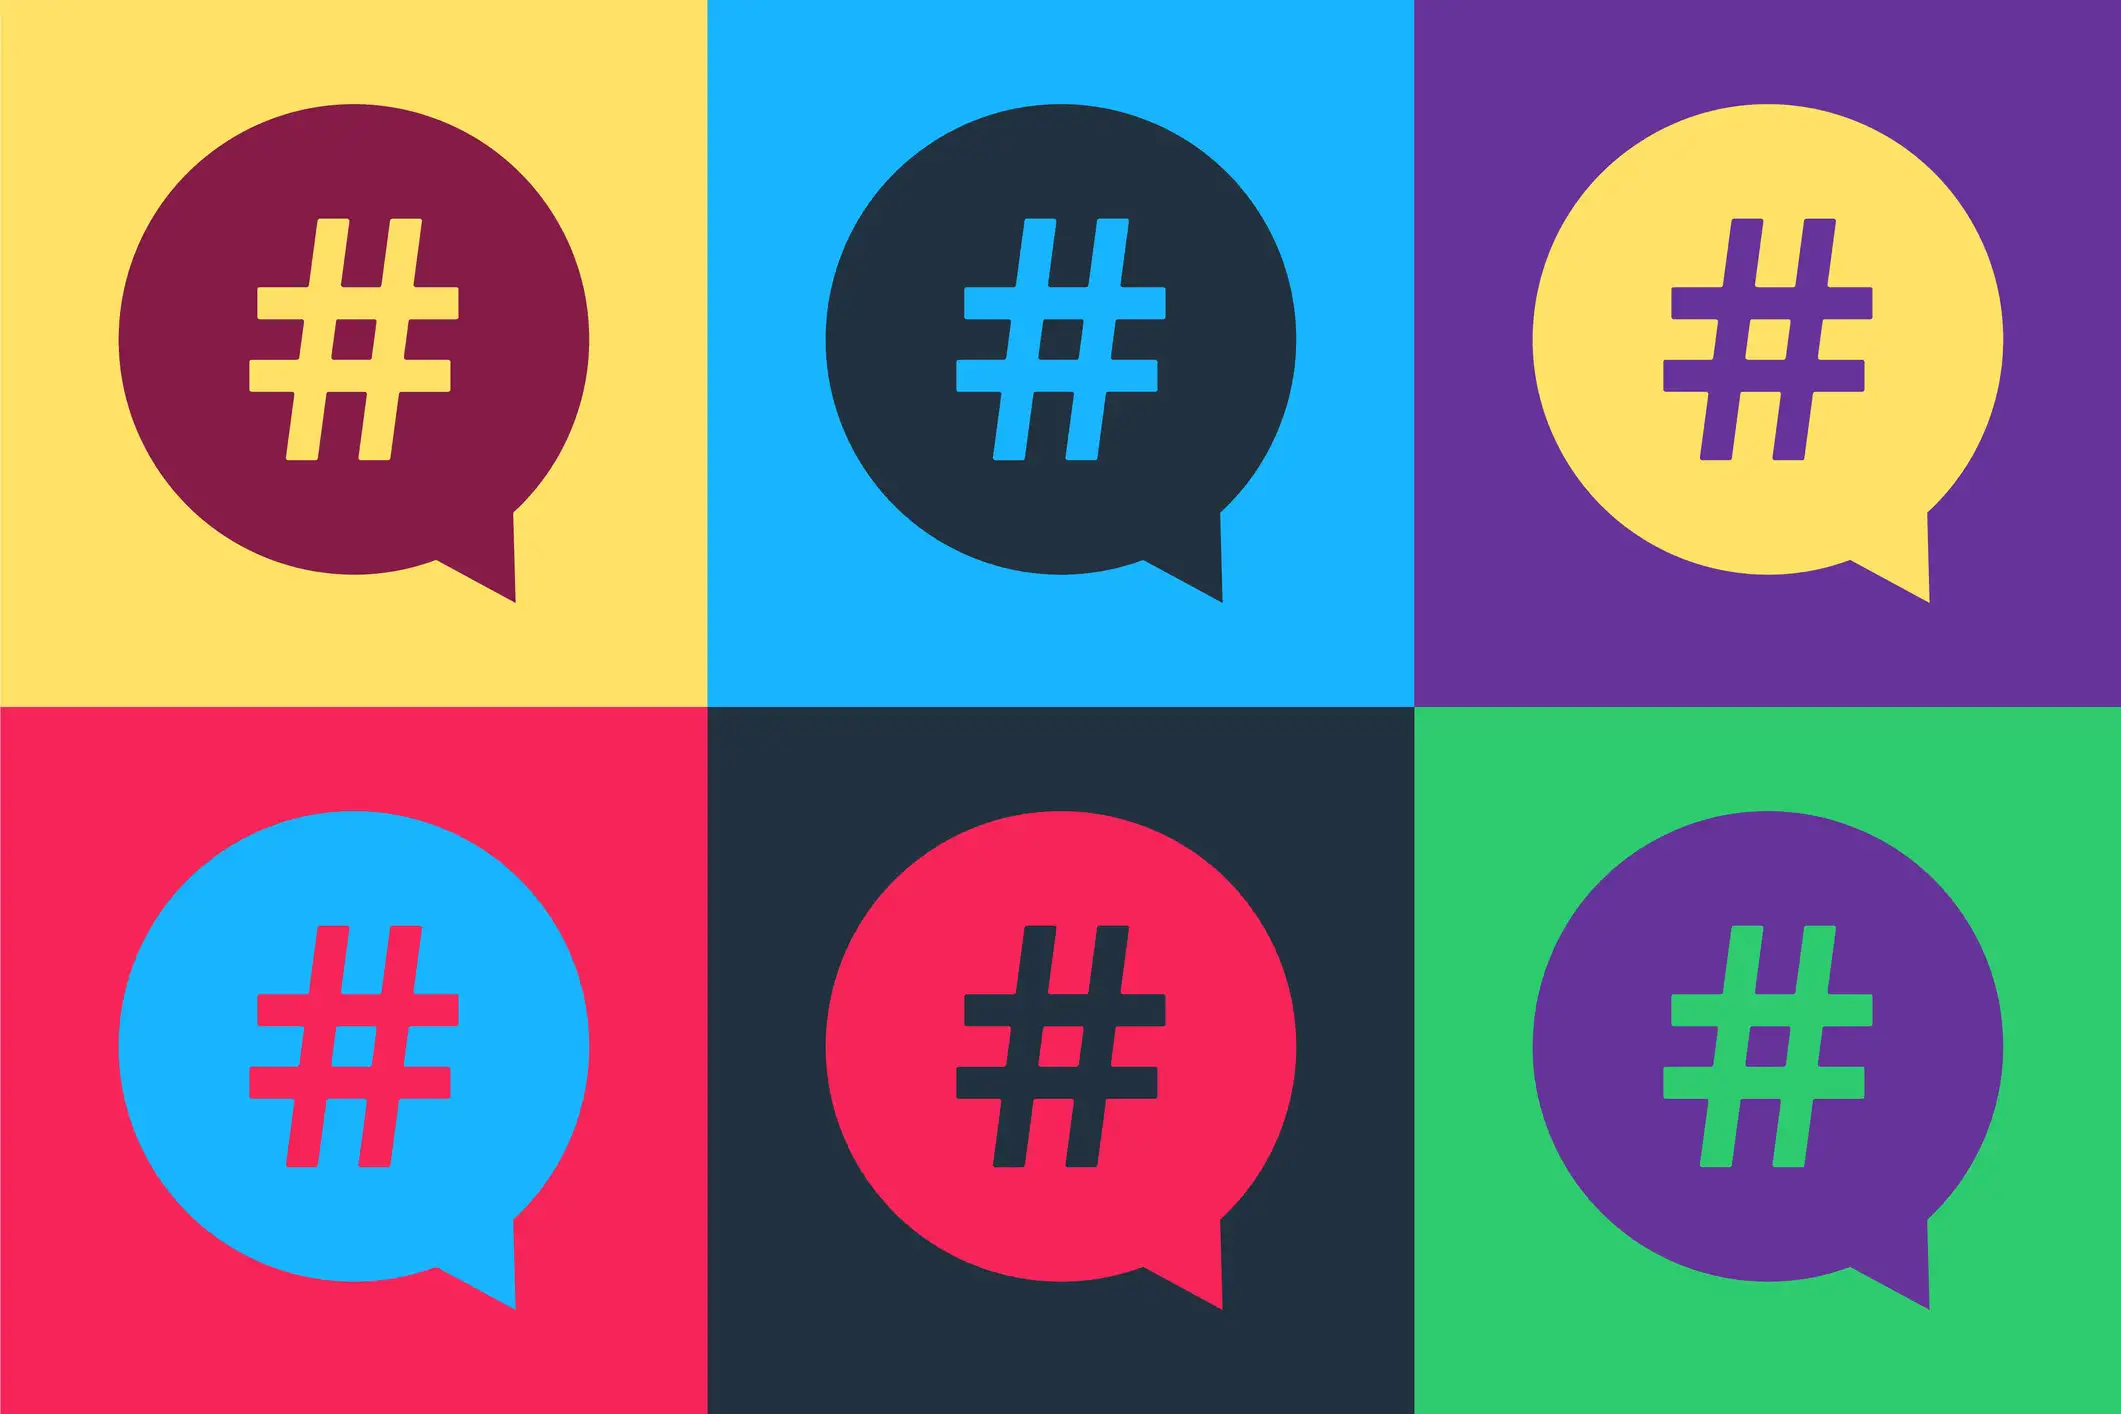 How To Use Hashtags Effectively on Social Media?